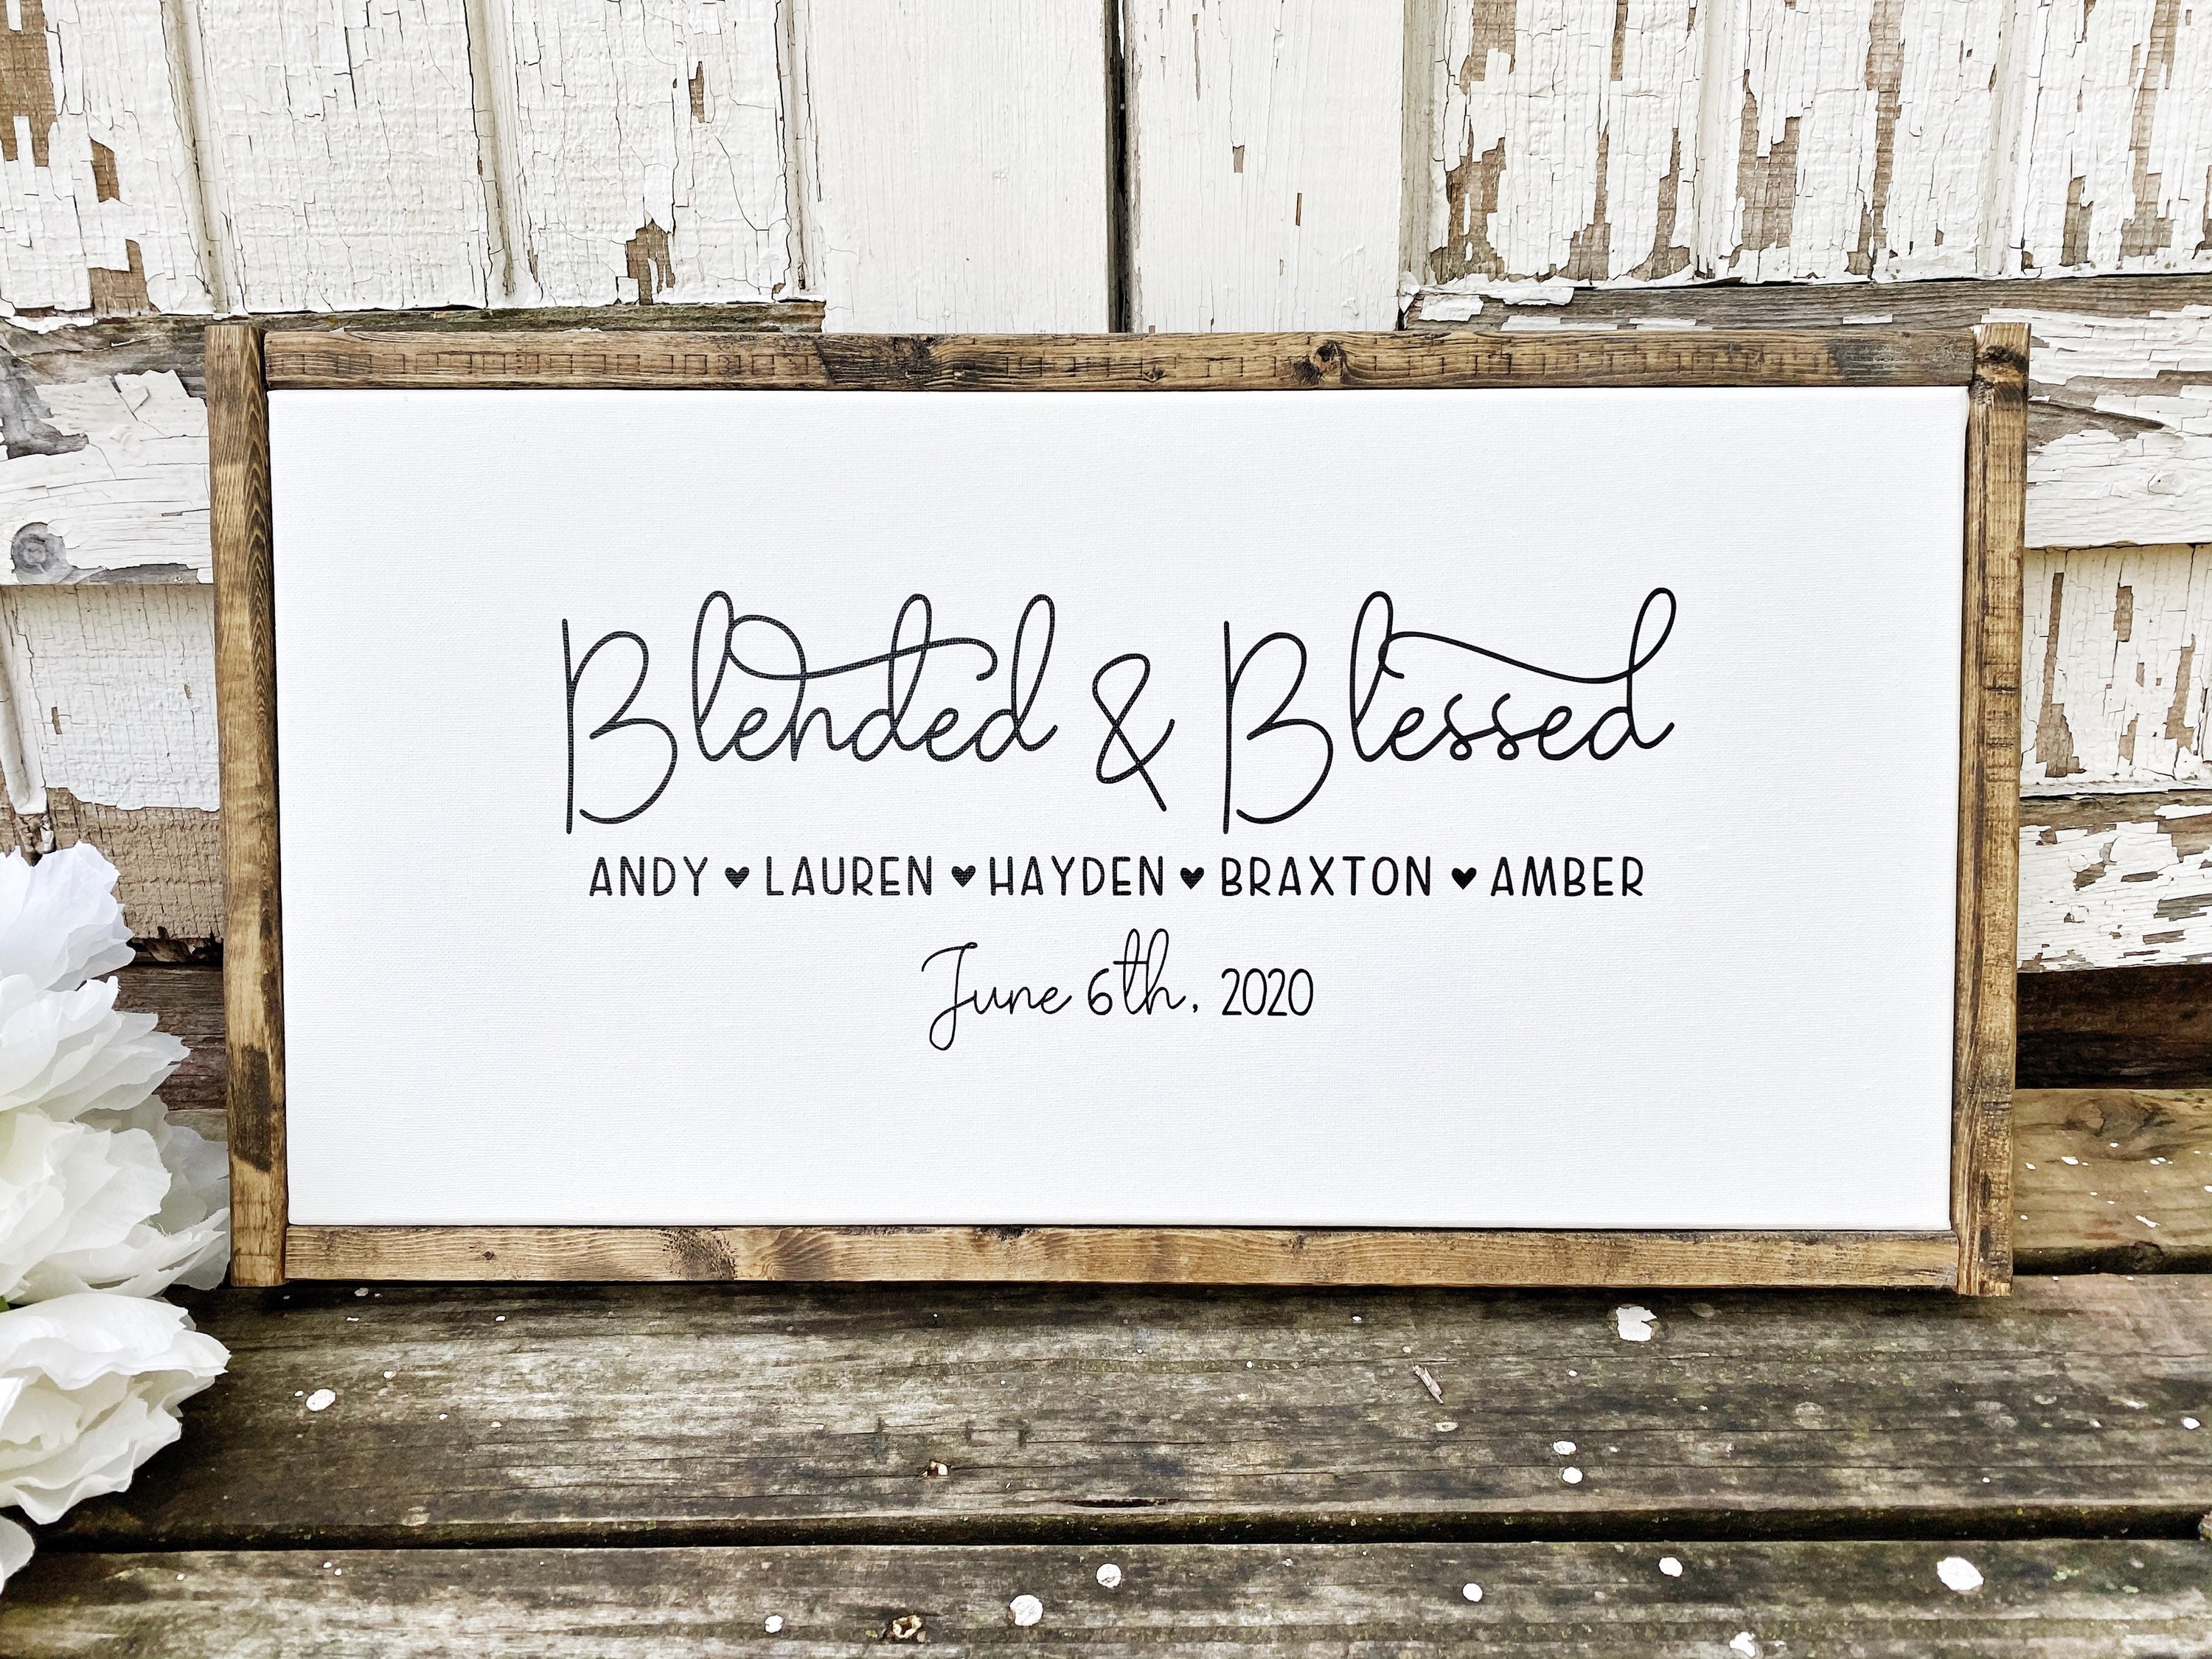 Blended and Blessed Welcome Door Mat Personalized Blended Family